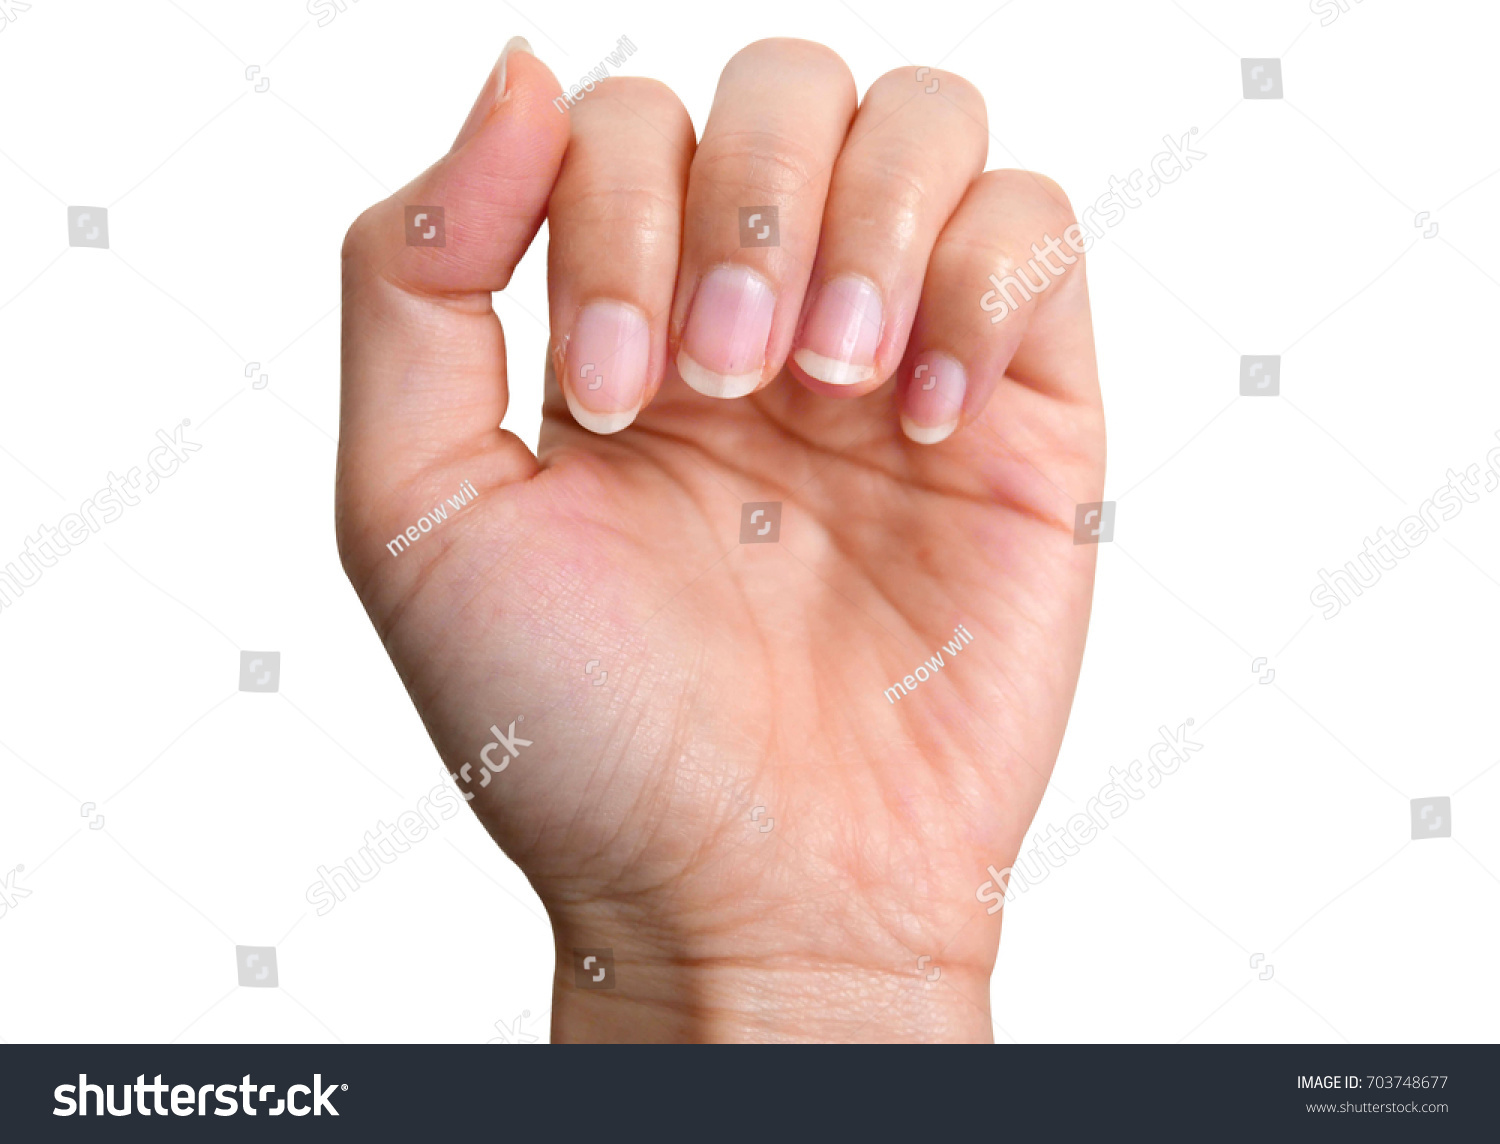 fingernail lack of nutrients and do not make nail not shape and not care, this image can be use for health care concept #703748677